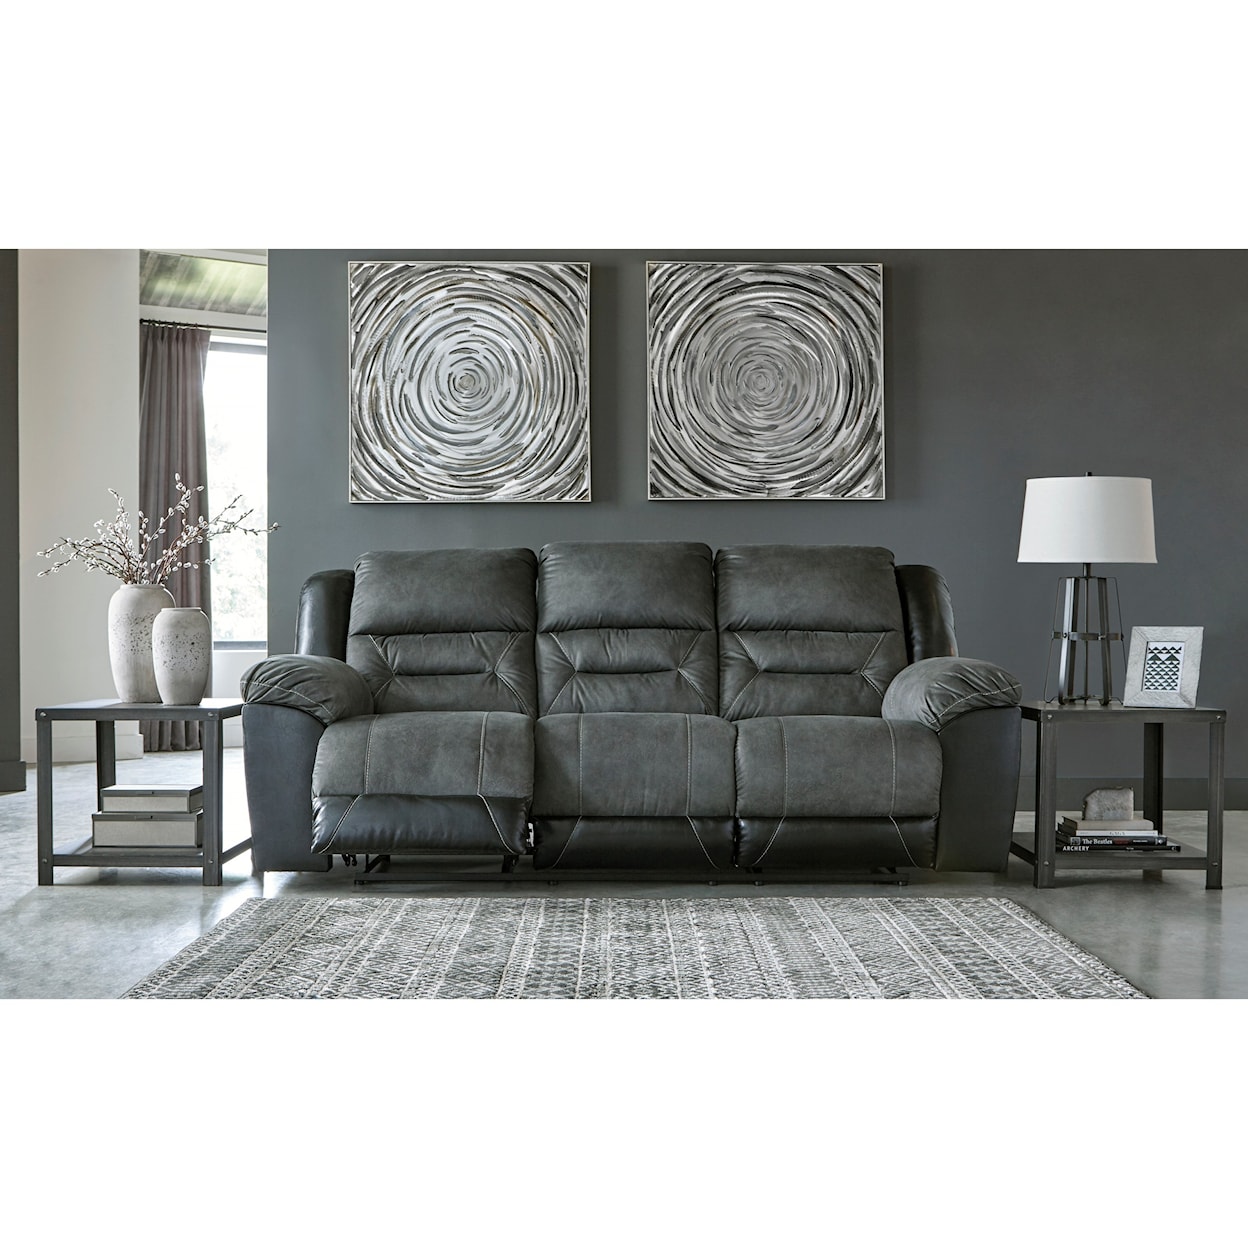 Signature Design by Ashley Furniture Earhart Reclining Sofa